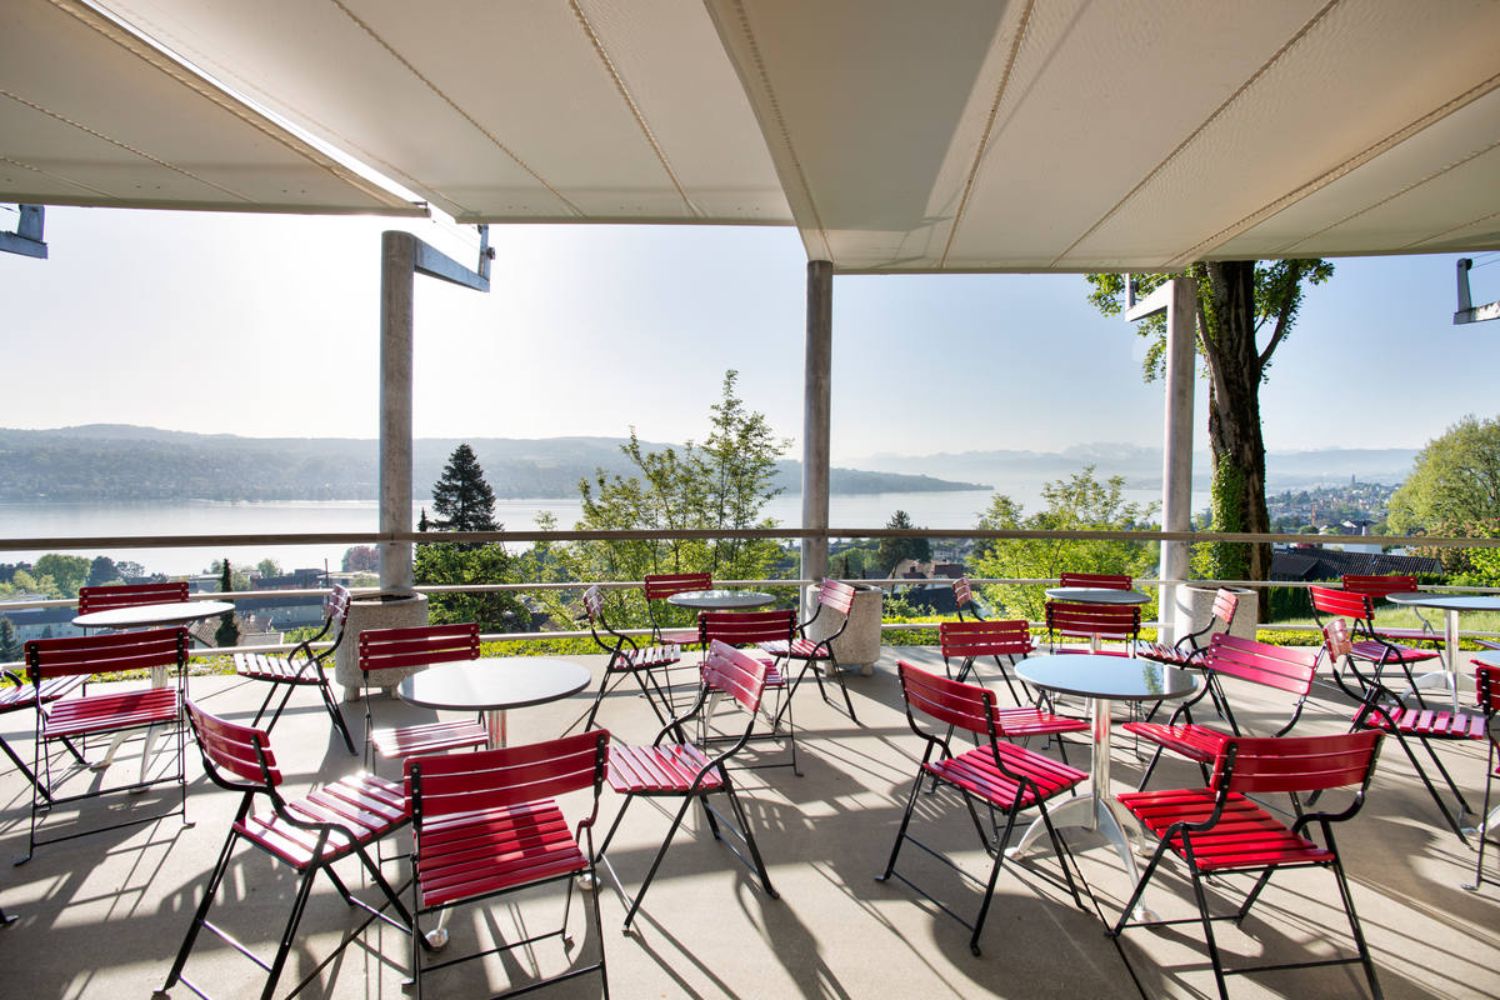 Tables and red chairs on a patio overlooking lake Zurich.